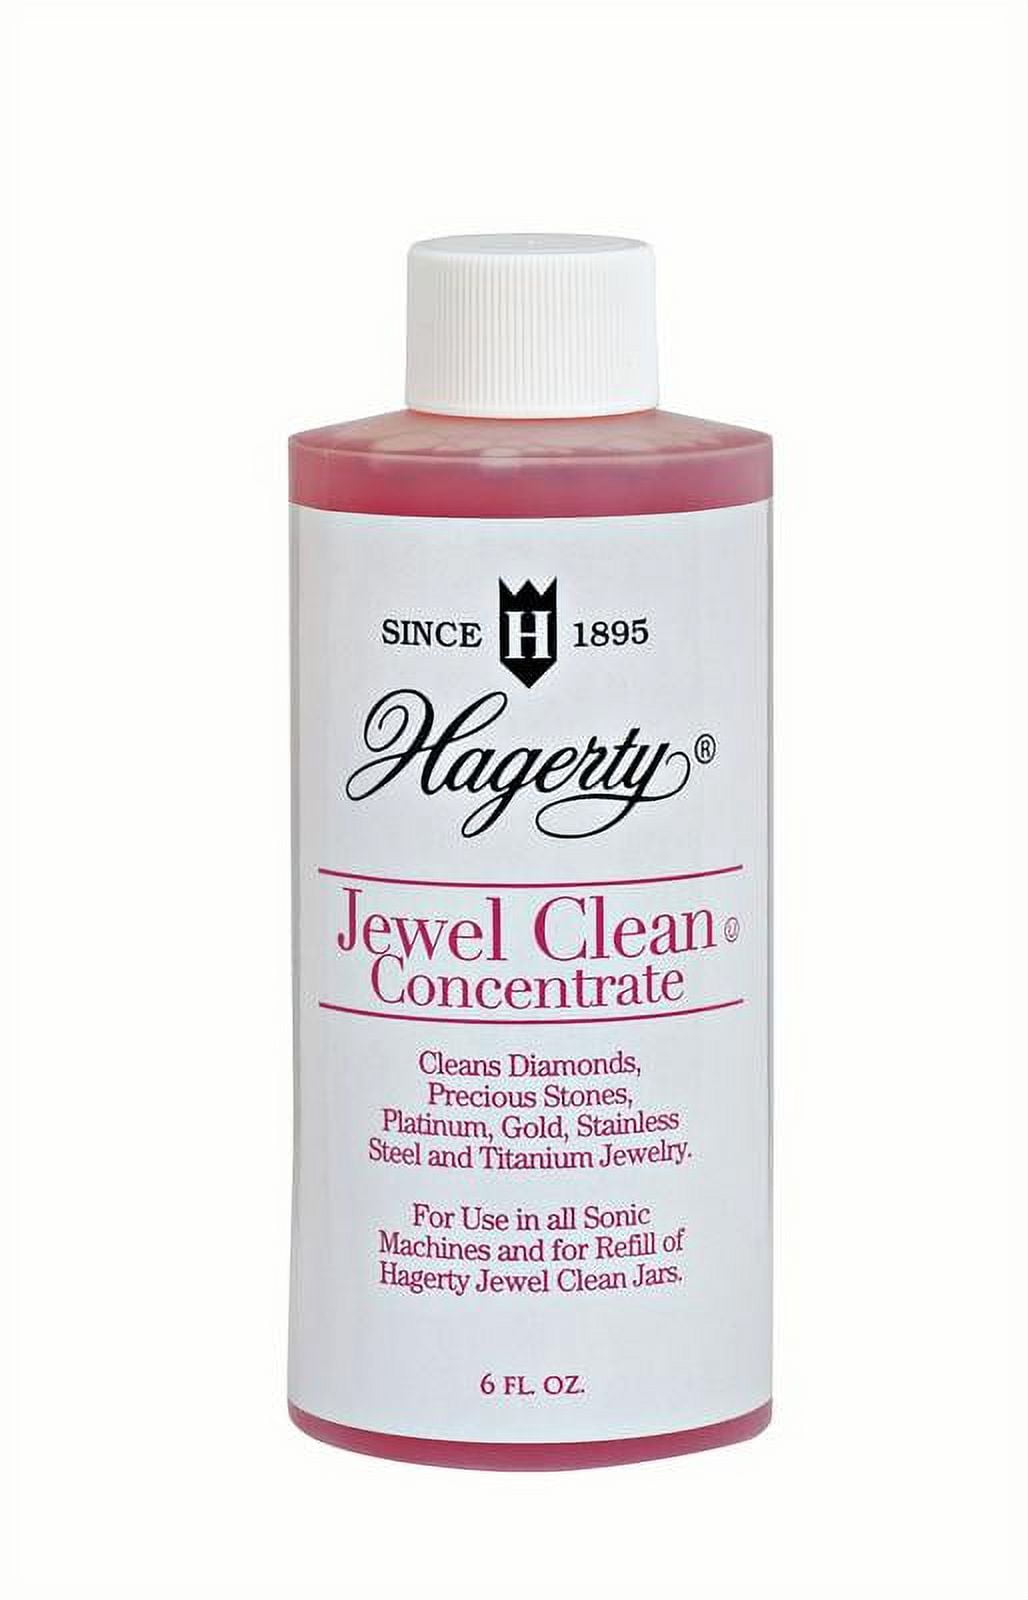  Hagerty Jewelry Cleaner - Professional Jewelry Cleaning for  Diamonds, Gold, Platinum, Precious Stones and More - Kosher Certified  Jewelry Cleaning Kit Includes Dipping Basket and Brush, 7 Oz : Clothing,  Shoes & Jewelry